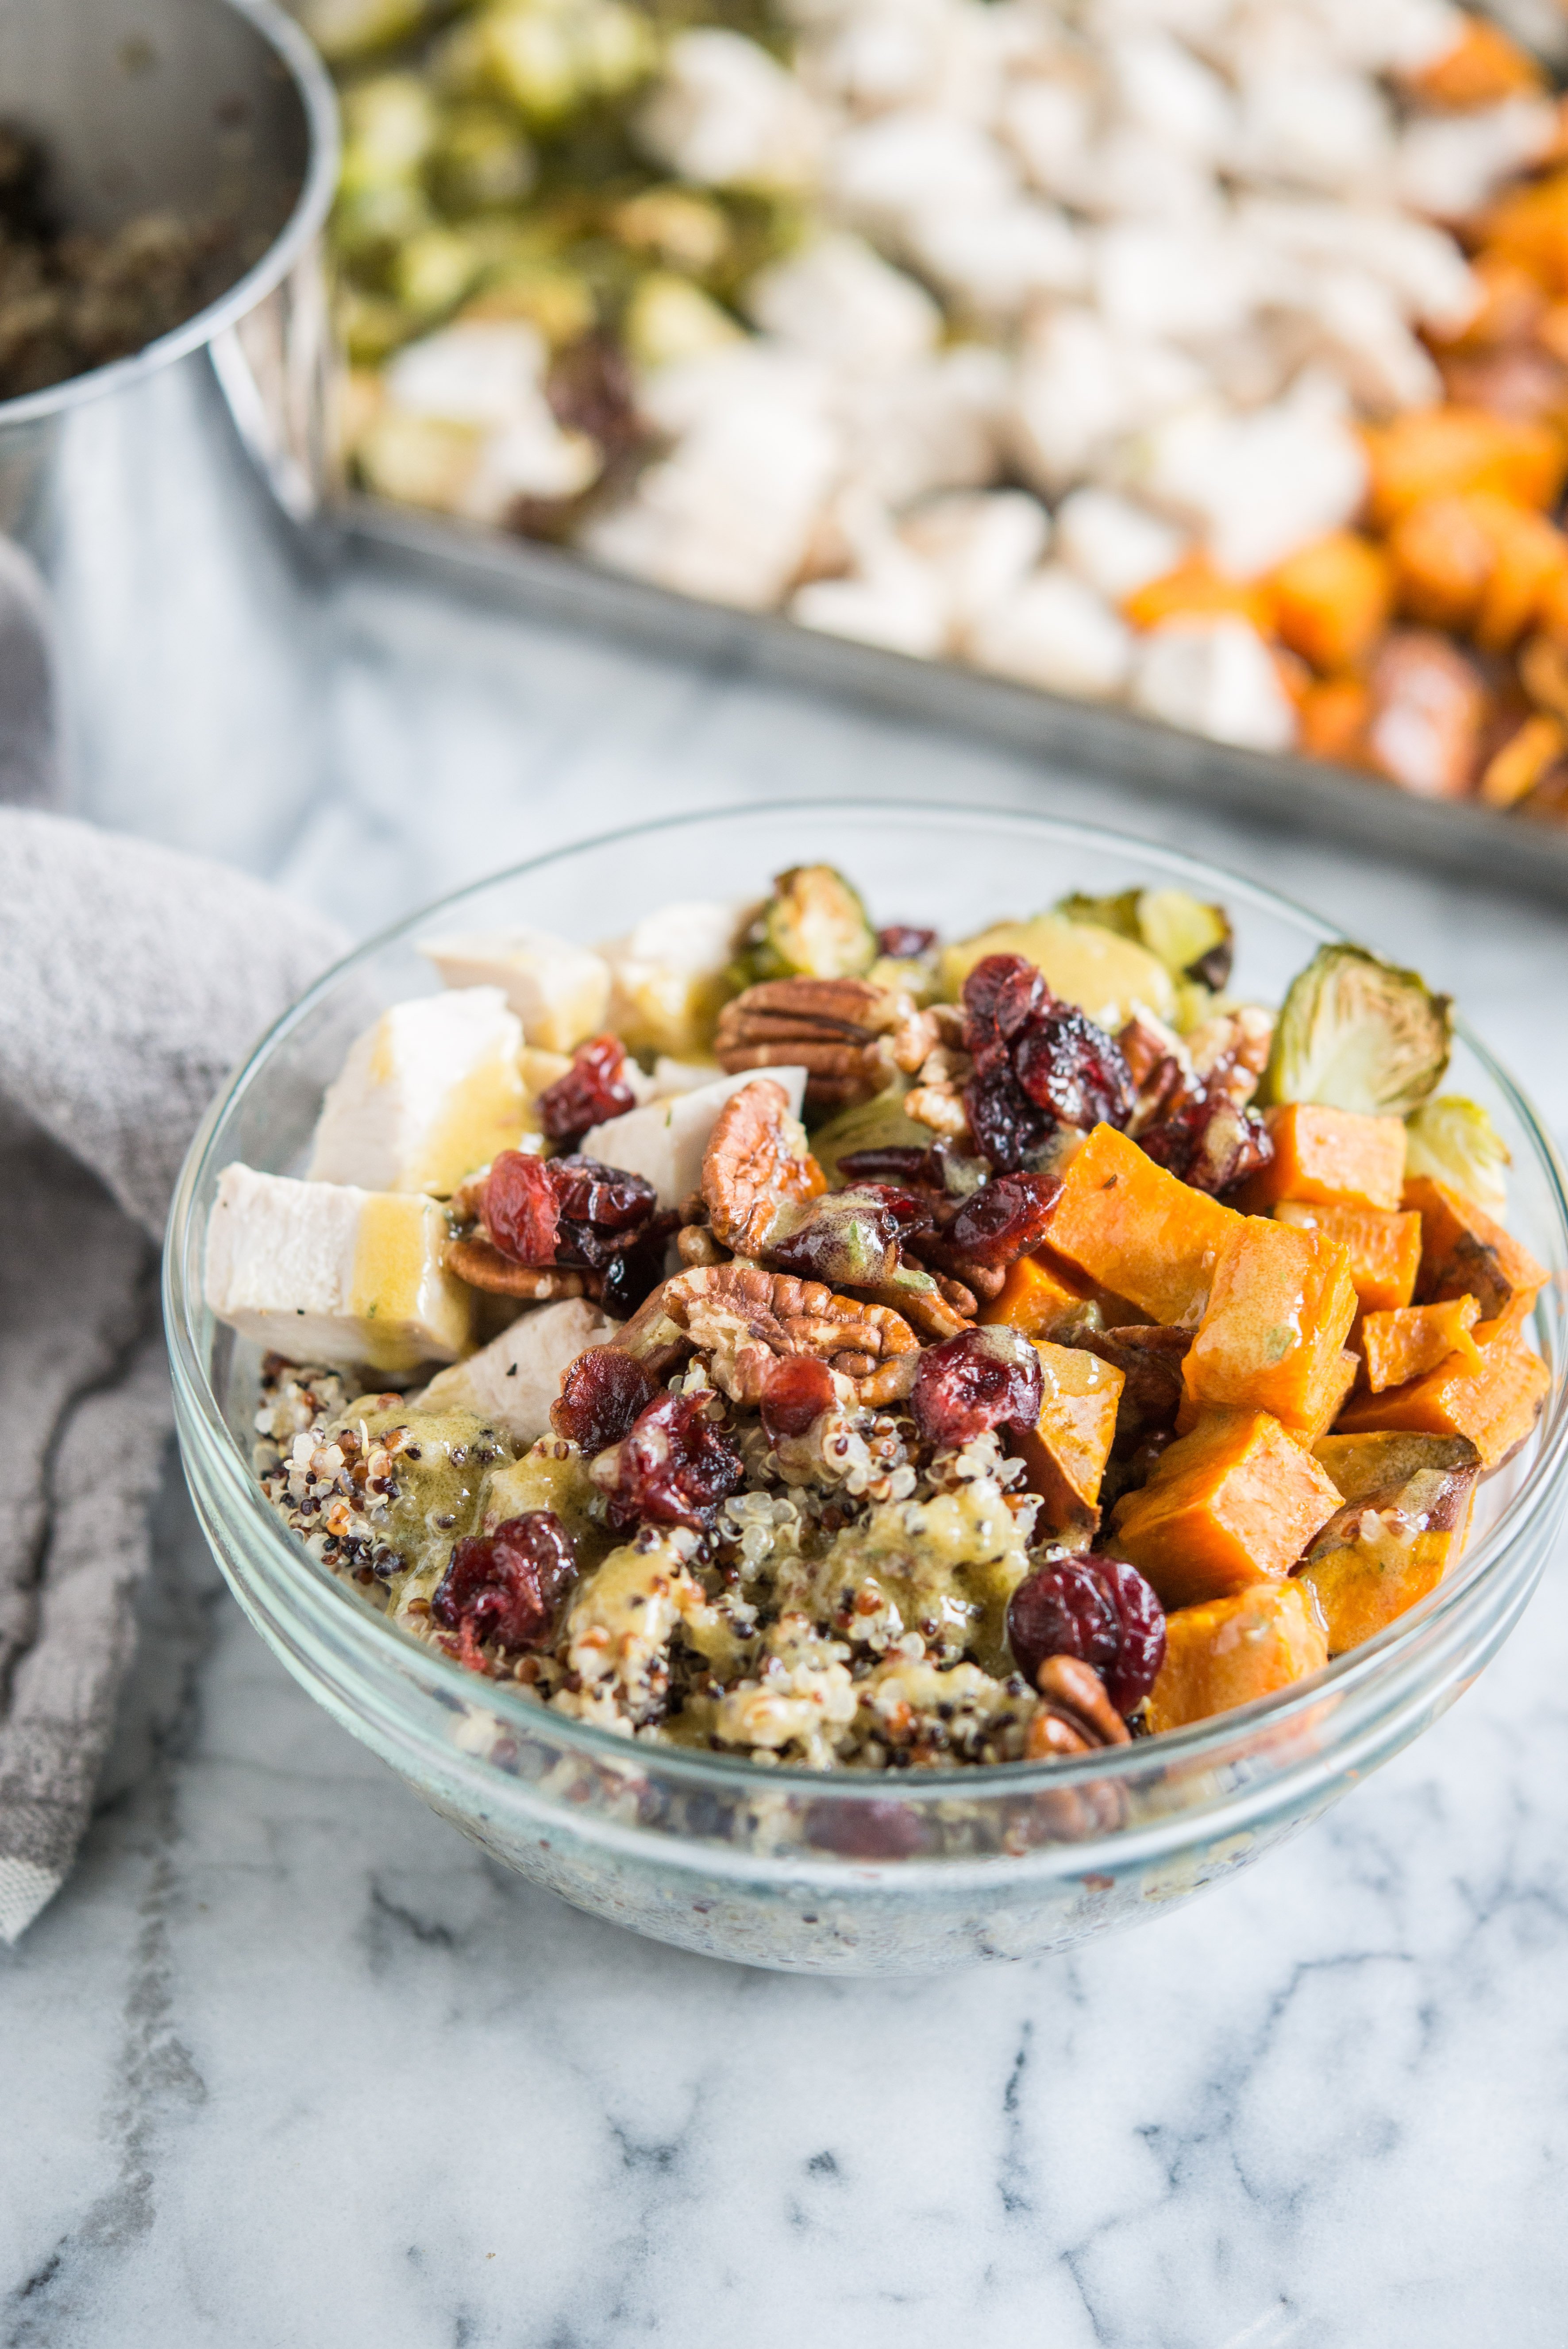 quinoa bowls with sweet potatoes, chicken, brussels spouts, pecans, and cranberries in a glass bowl on a marble countertop in front of a sheet pan with cubed chicken and sweet potatoes